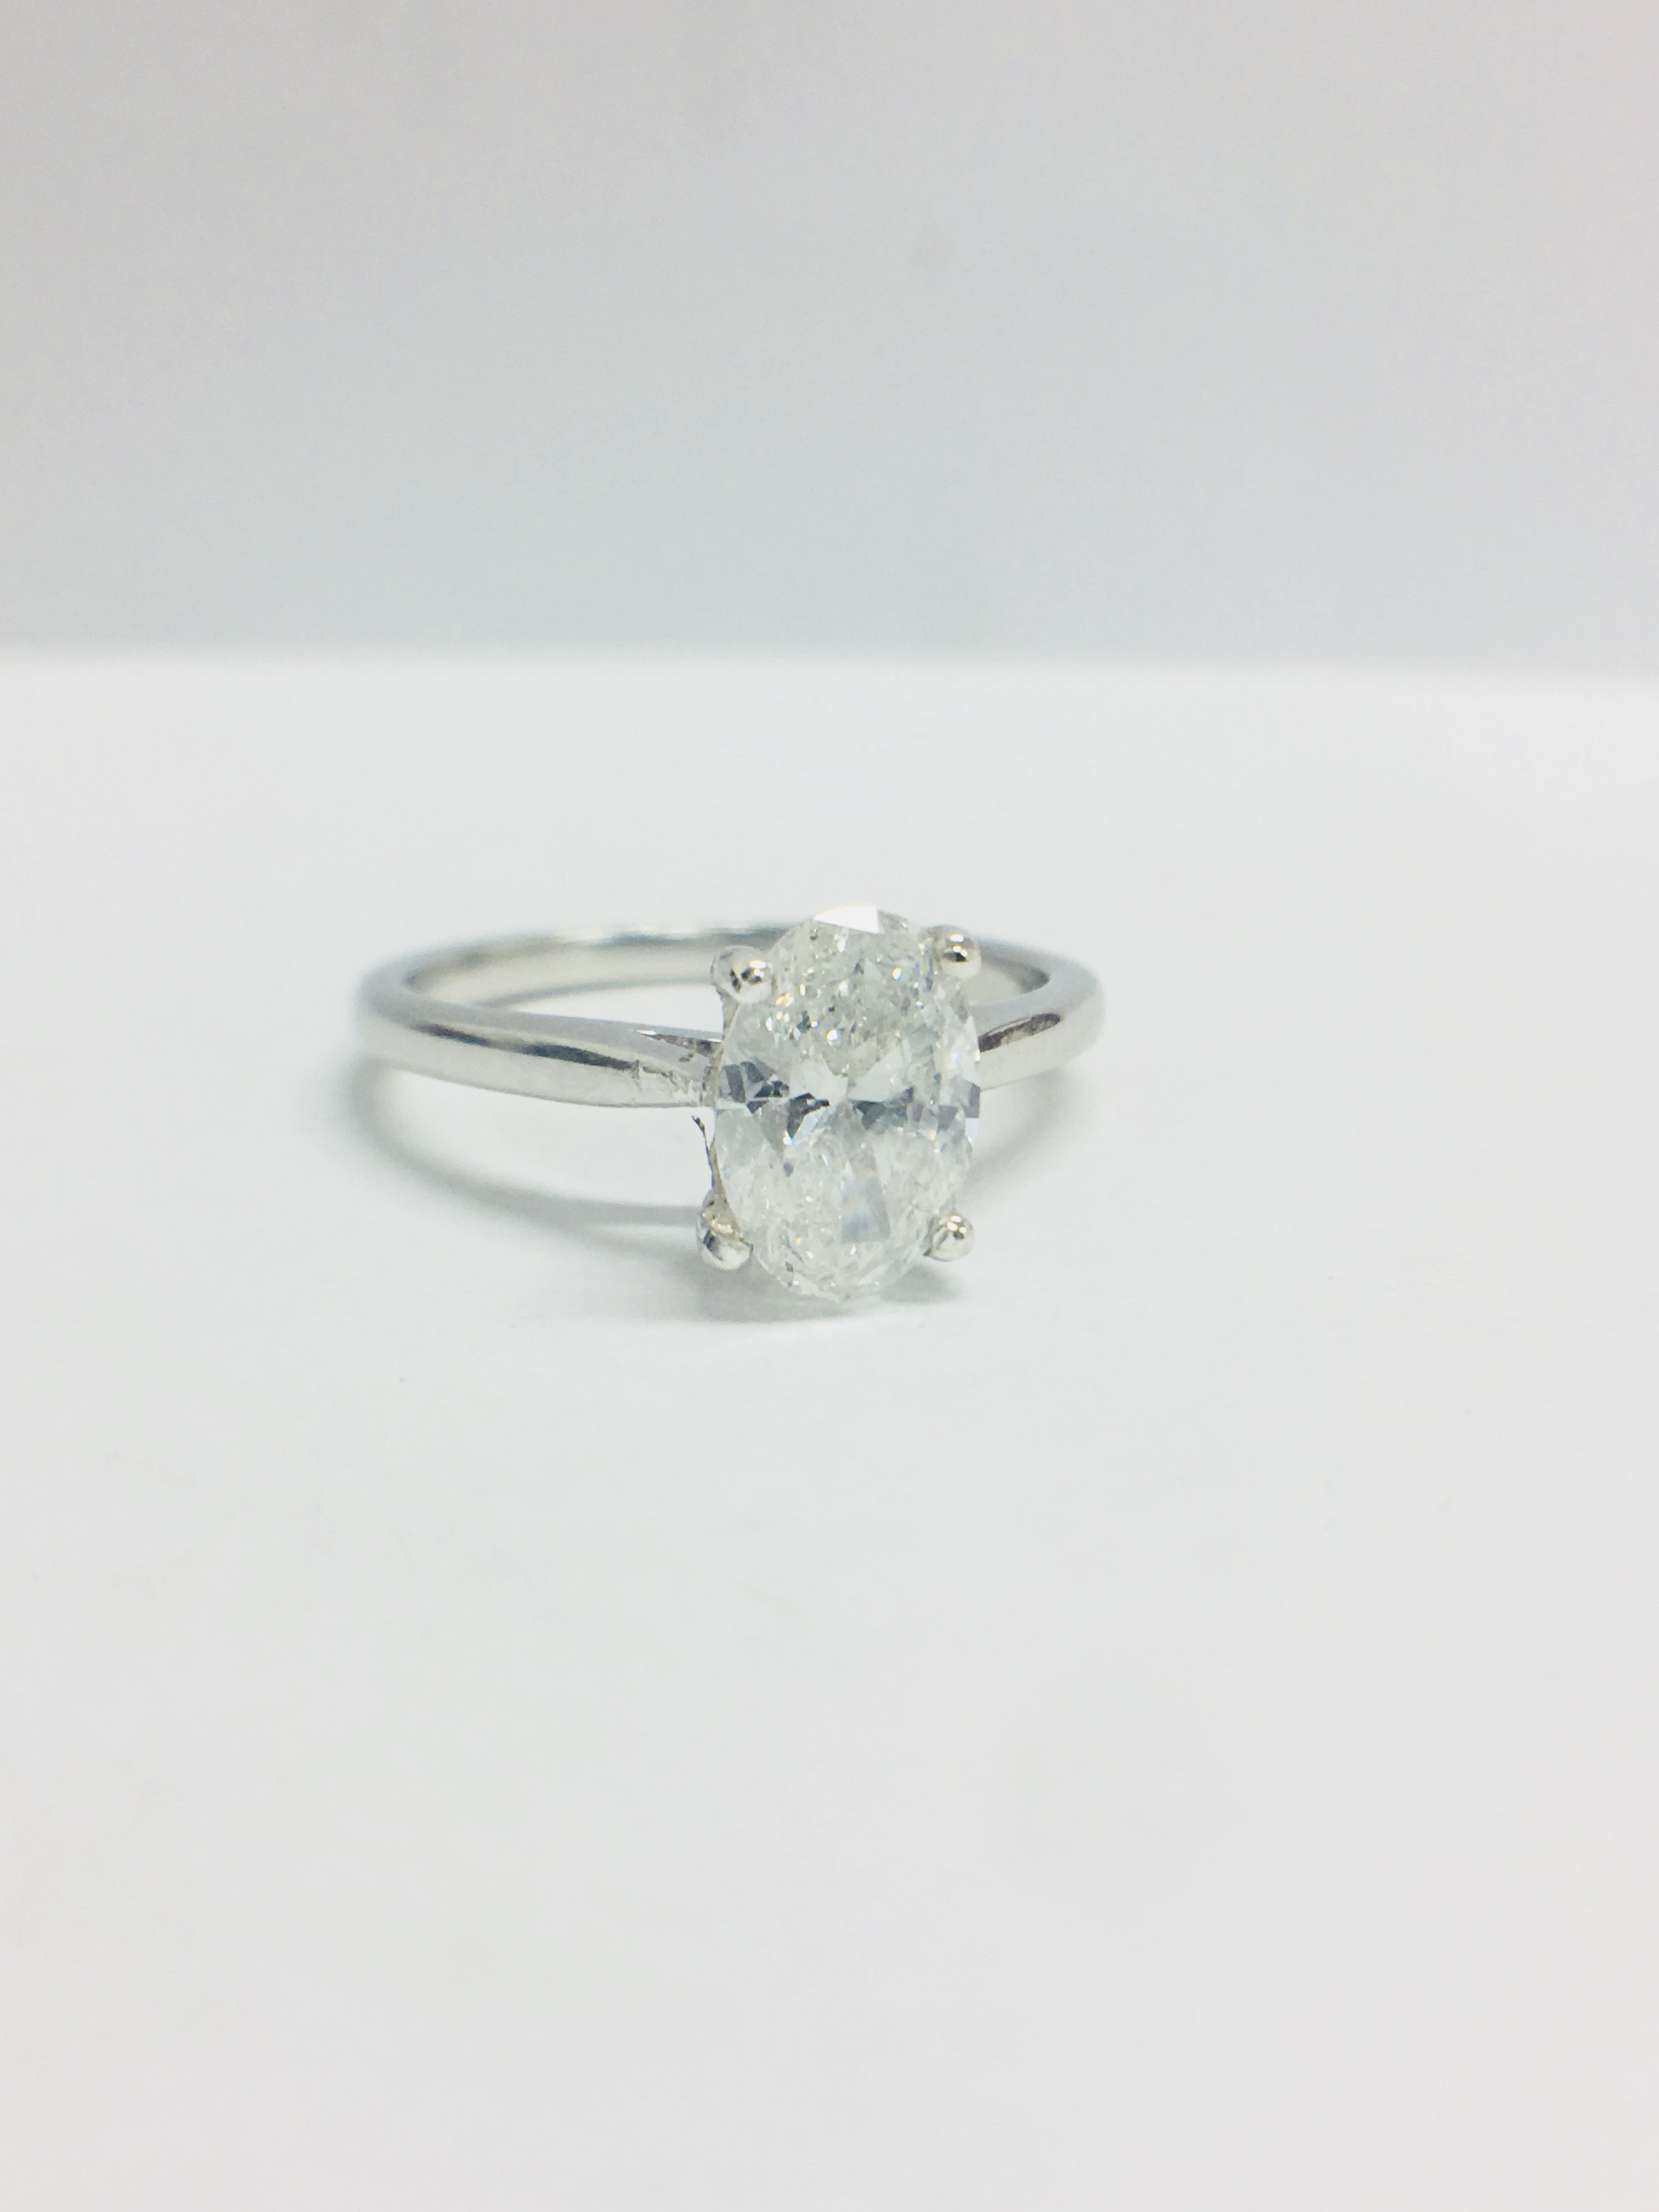 Platinum Oval Cut Diamond Solitaire Ring, - Image 4 of 9